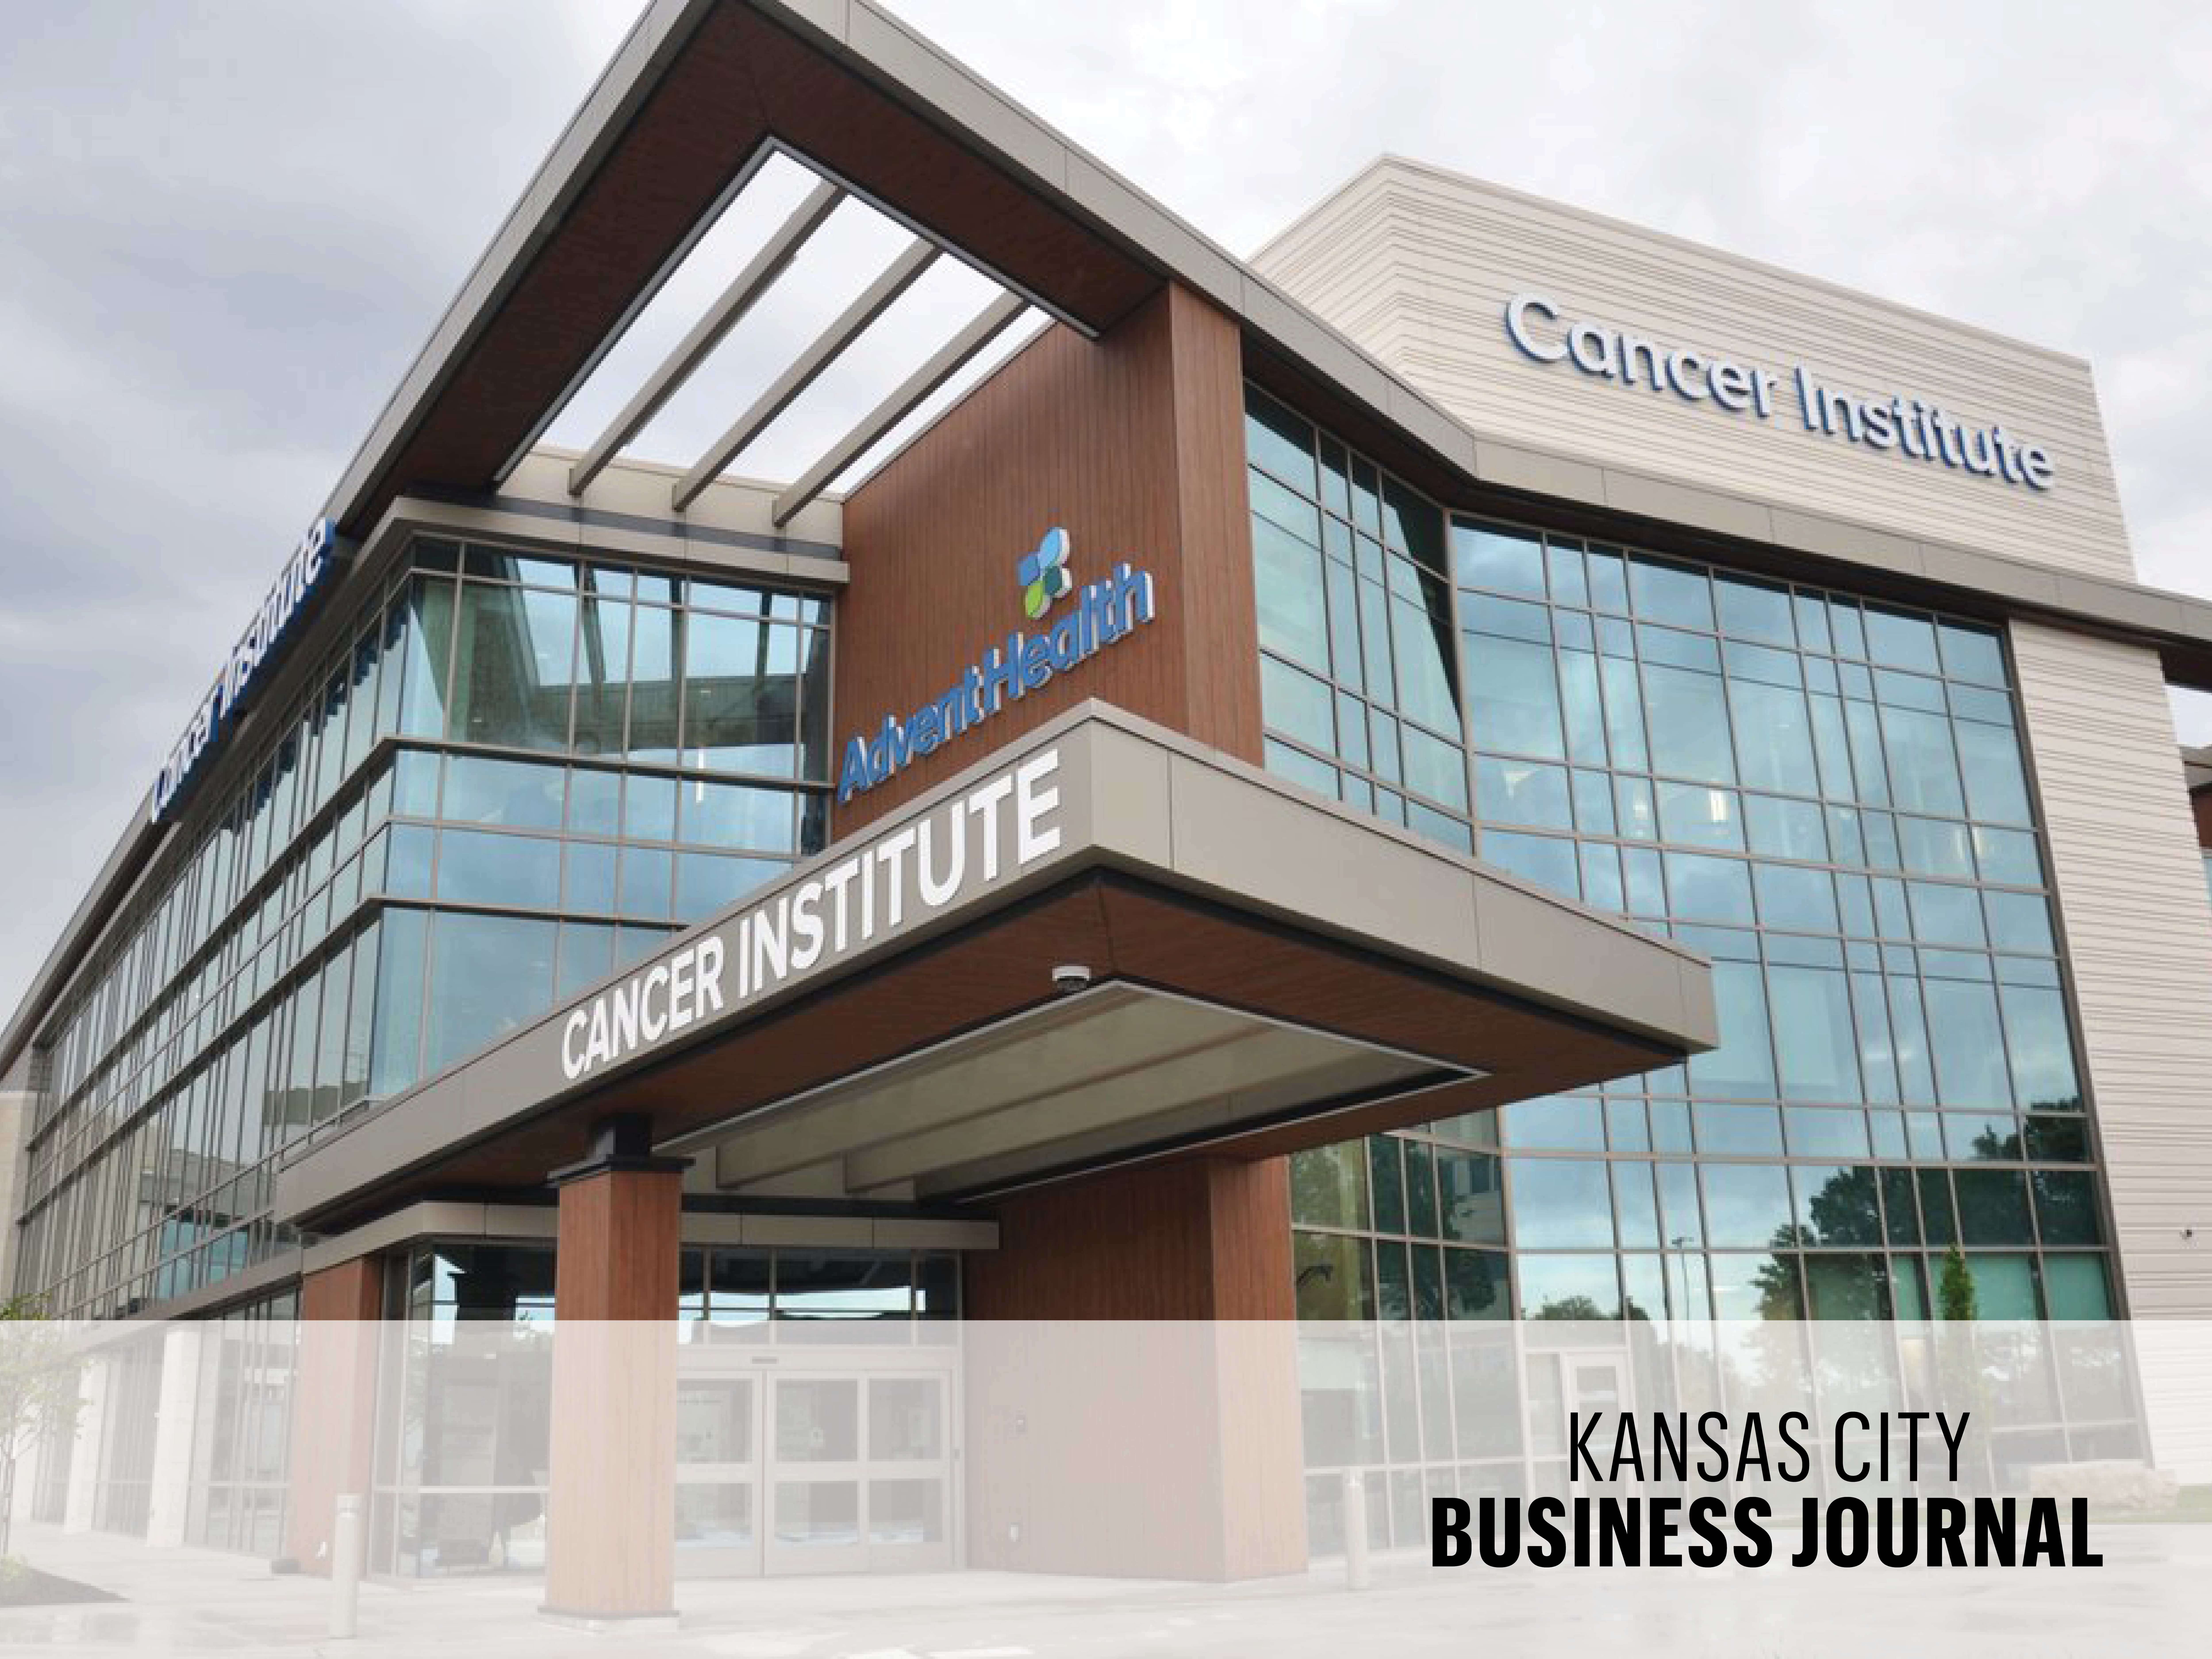 AdventHealth Shawnee Mission opens $76M cancer institute